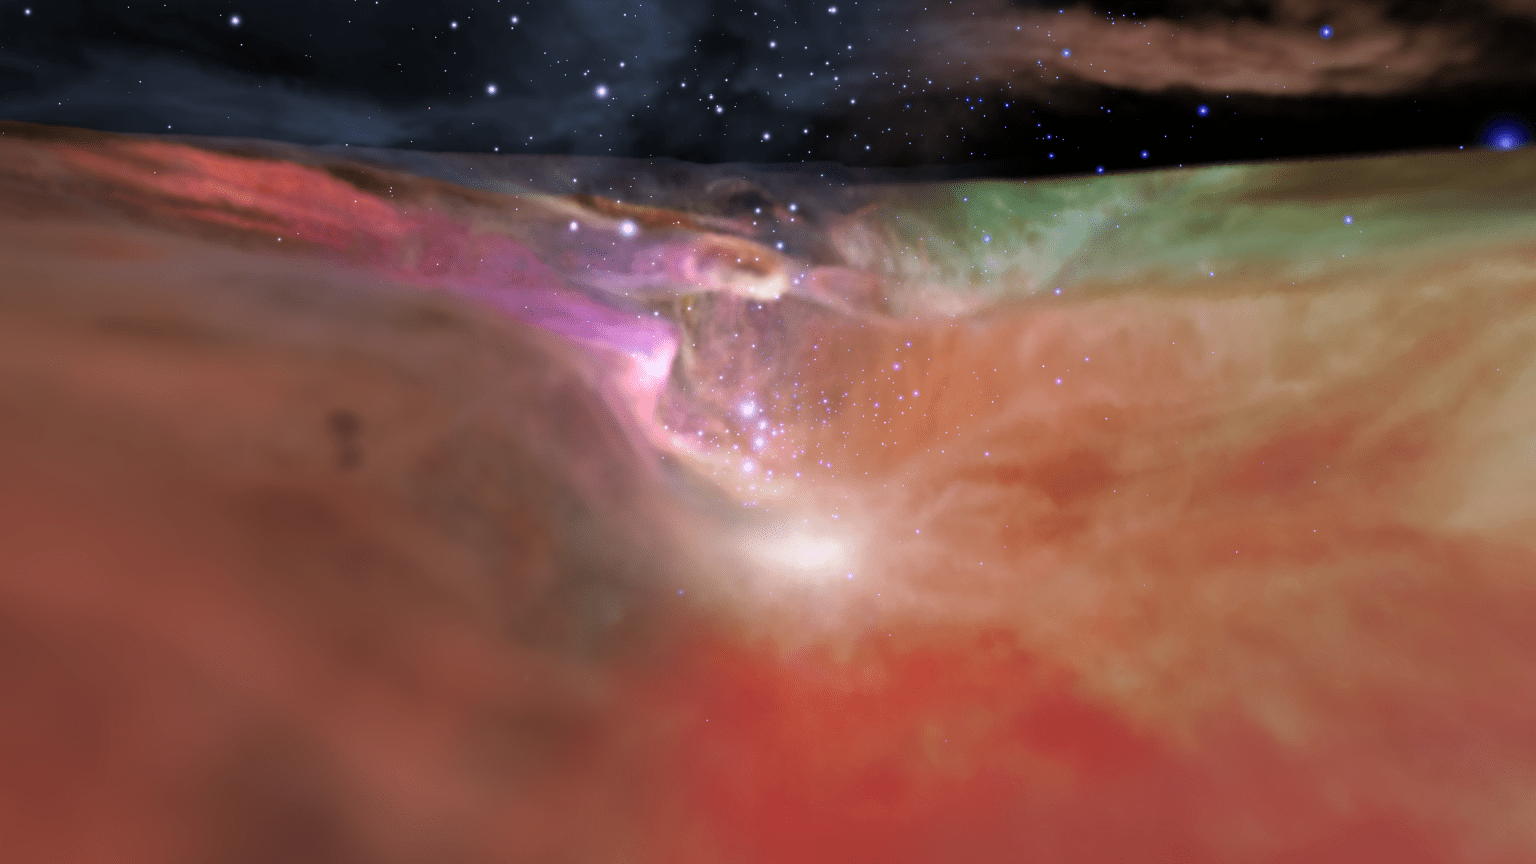 An undulating cloudscape of orange, yellow, green, red, pink, and purple gas clouds fill the bottom three-quarters of the image. A bright-white star sits withing the clouds just below image center. Above that star, the gas cloud thins out and a cluster of bright blue-white stars is visible through the mist. Top quarter of the image is black with scattered stars and a rusty-orange-band of clouds at upper right.